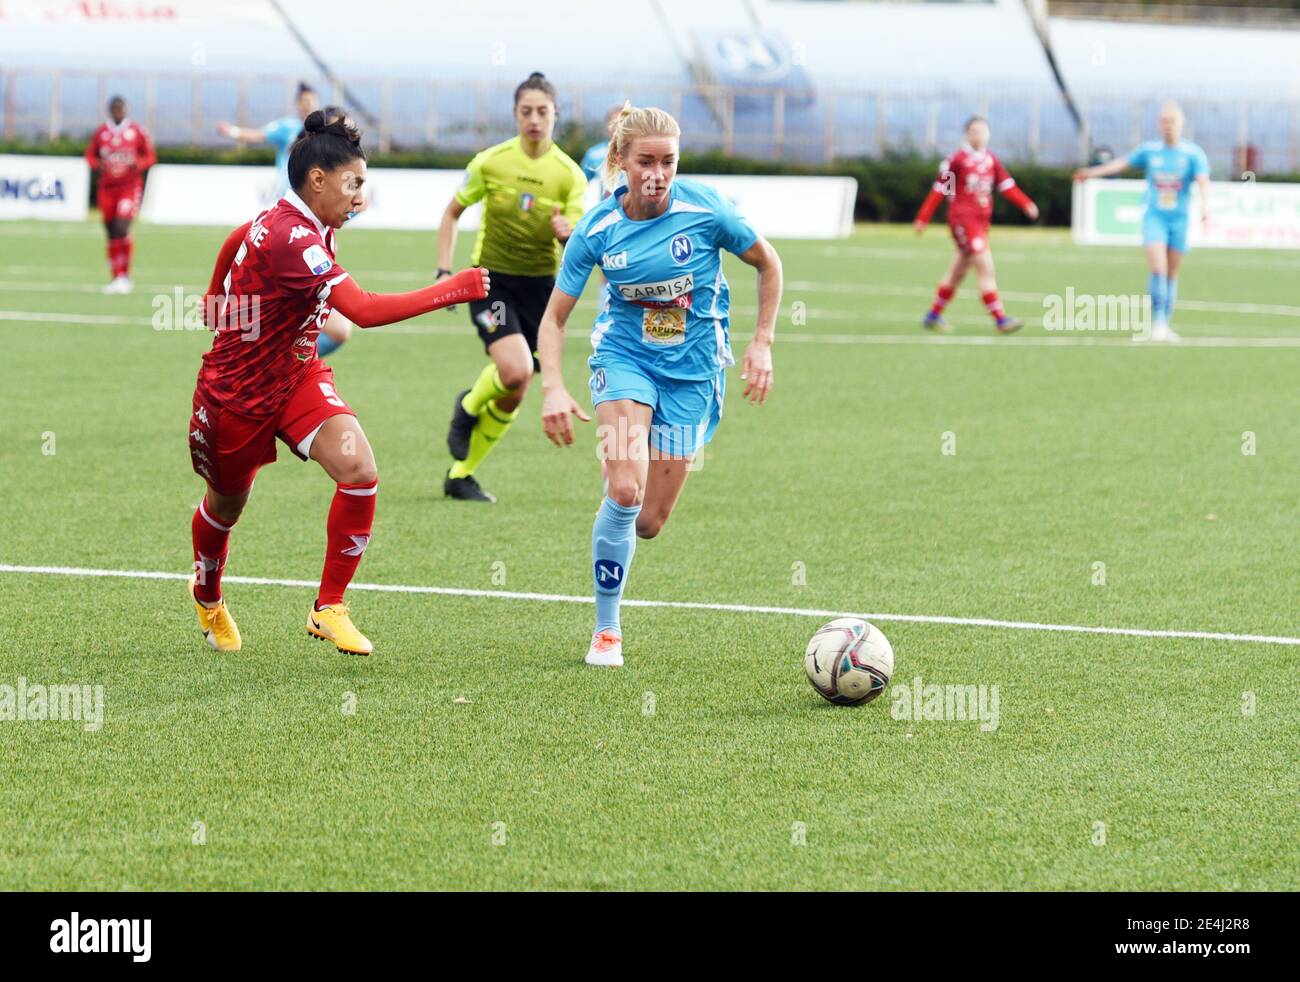 Italy. 23rd Jan, 2021. Jenny Hjohlman in action during in the match of Serie A Female, the Italian Woman League Football at “Caduti di Brema” stadium of Naples, on the field Napoli vs Bari, Napoli won the match 1-0. (Photo by Pasquale Gargano/Pacific Press) Credit: Pacific Press Media Production Corp./Alamy Live News Stock Photo